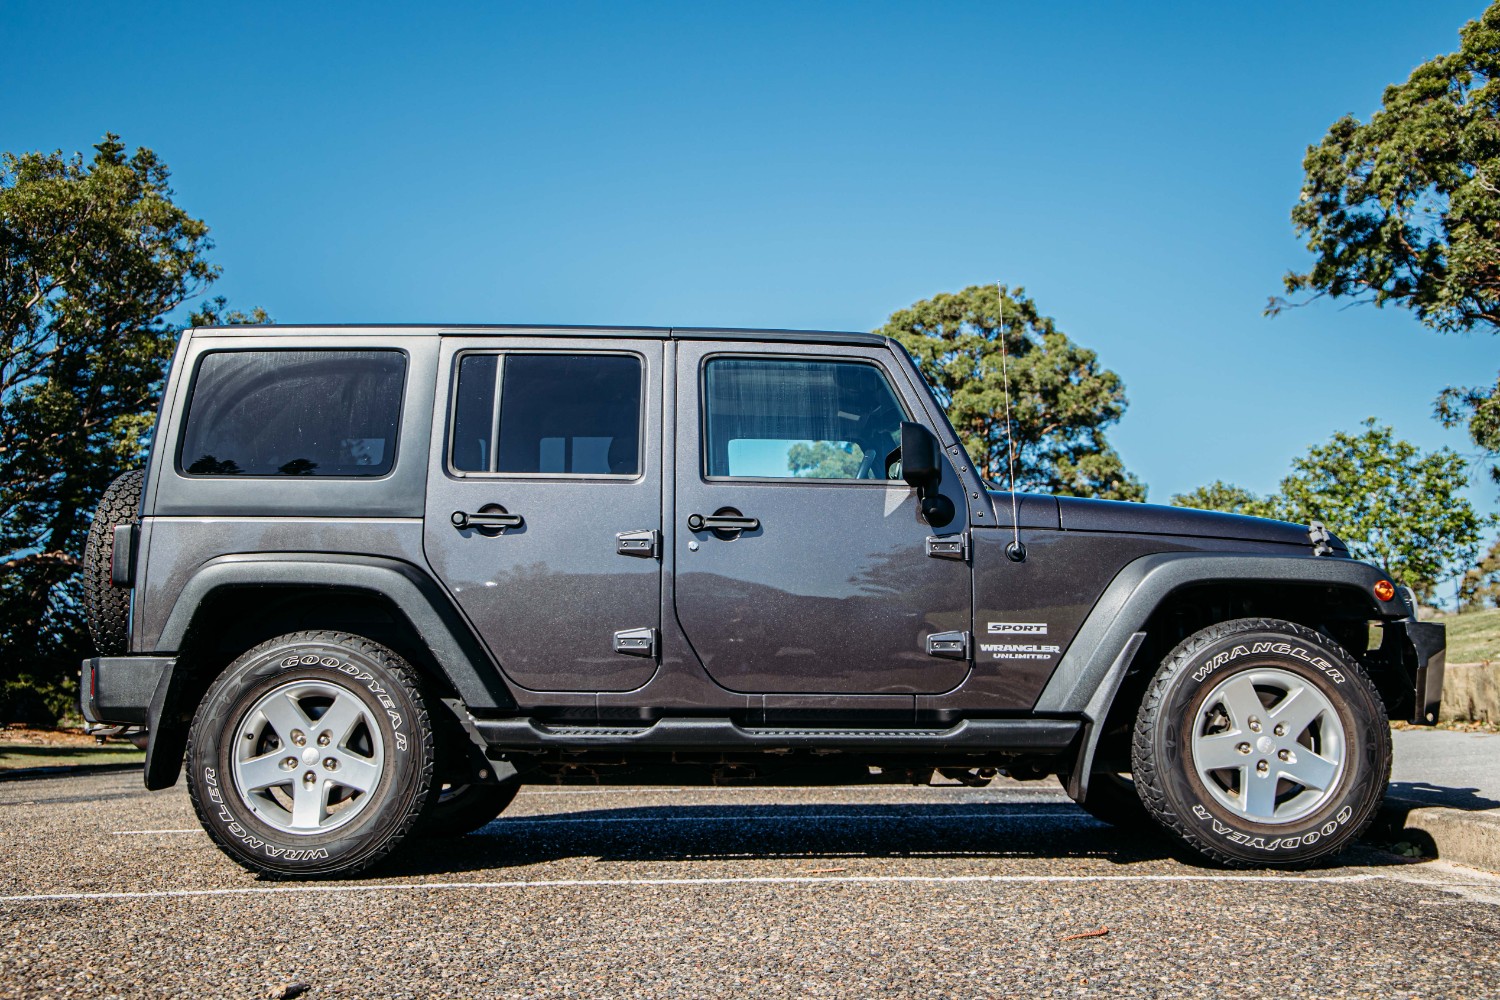 2014 Jeep Wrangler Unlimited - Sport Convertible Image 18